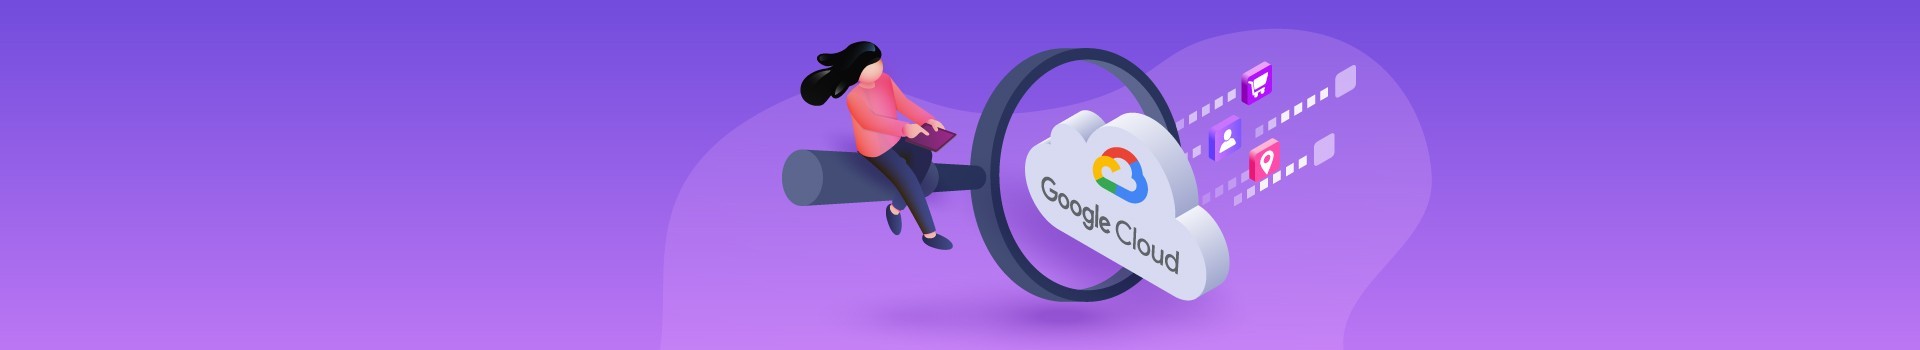 Know your Clouds: Google Cloud